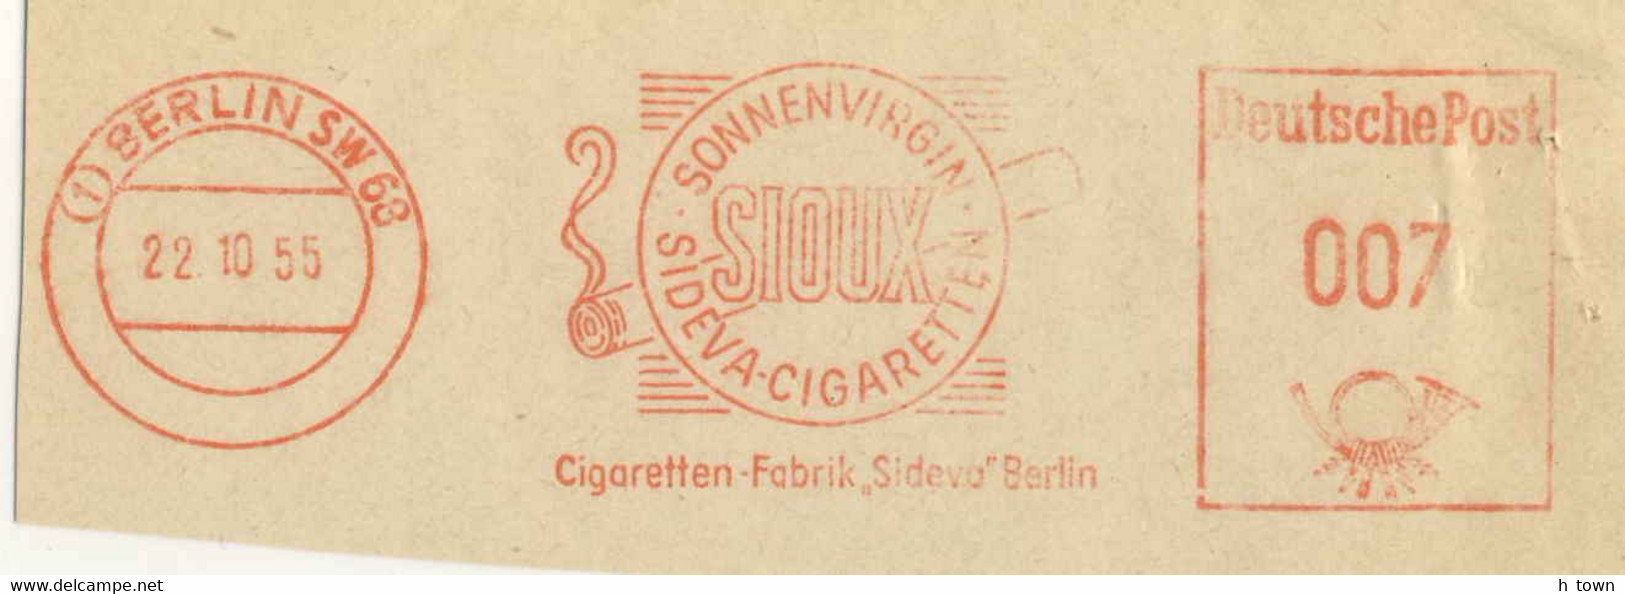 125  Tabac, Cigarette: Ema D'Allemagne, 1955 - Tobacco Meter Stamp From Germany. Sioux Berlin SW 68 - Droga